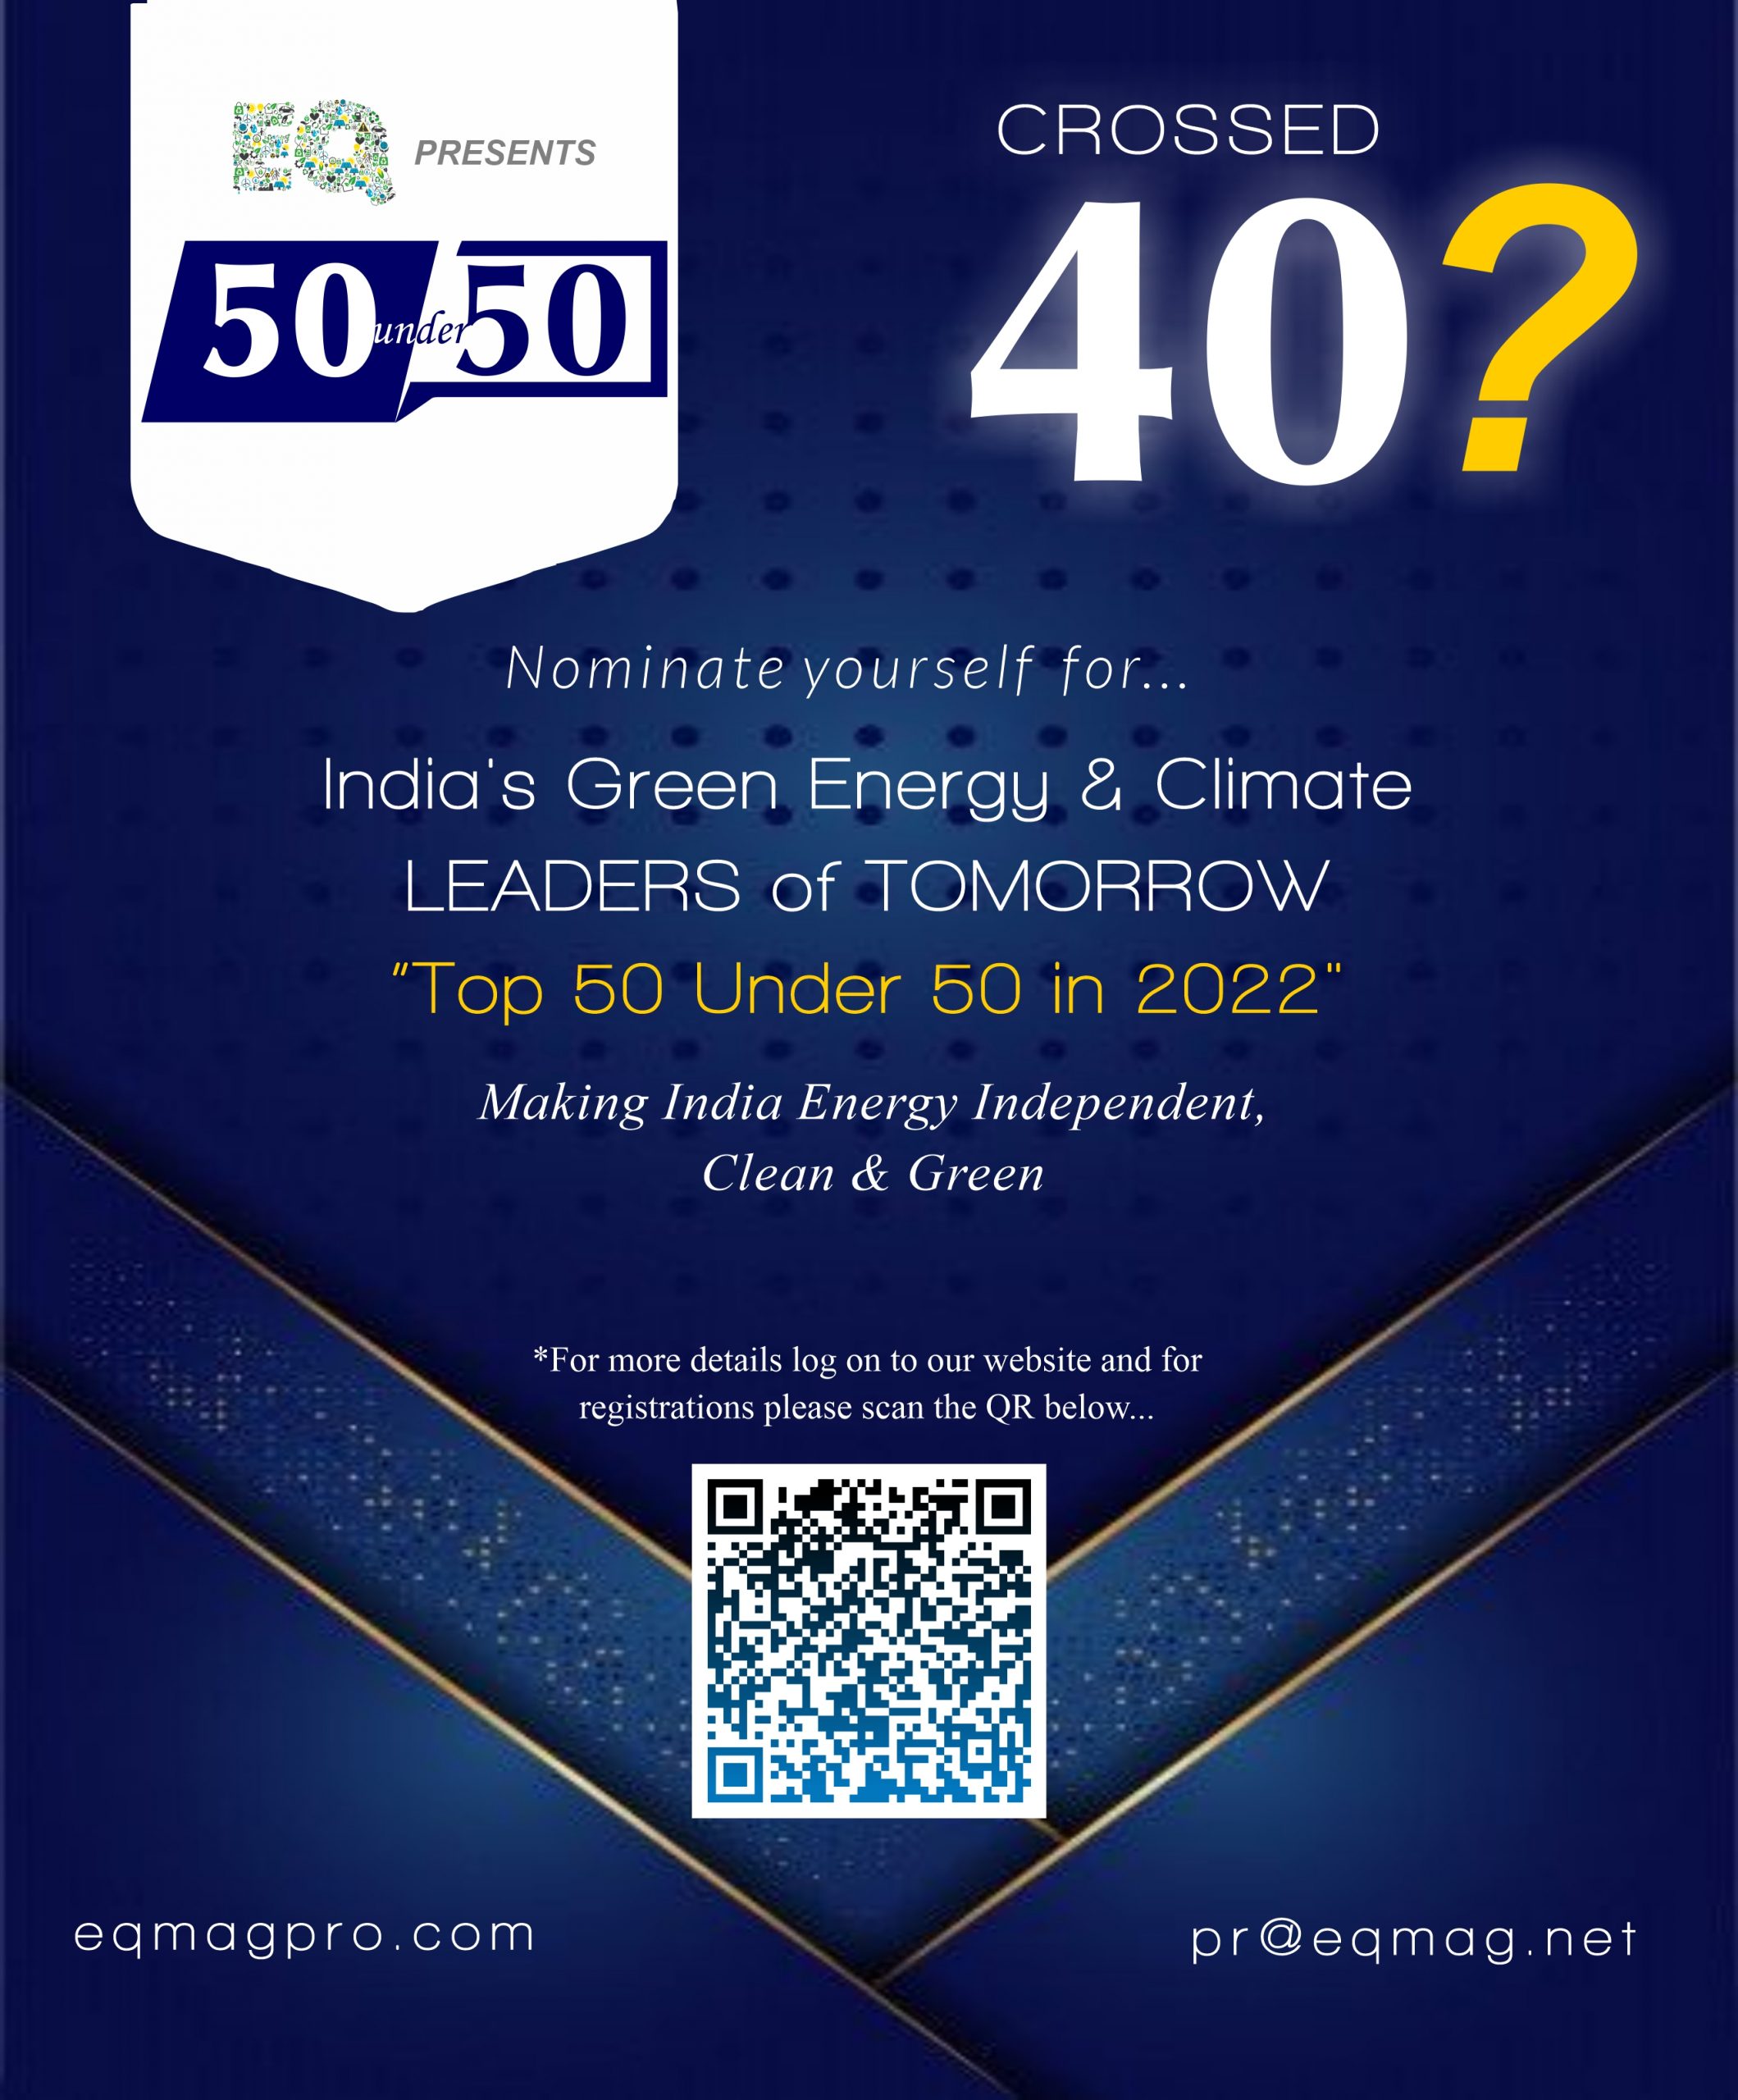 India’s Green Energy & Climate Leaders of Tomorrow – Top 50 Under 50 in 2022 – Making India Energy Independent, Clean & Green